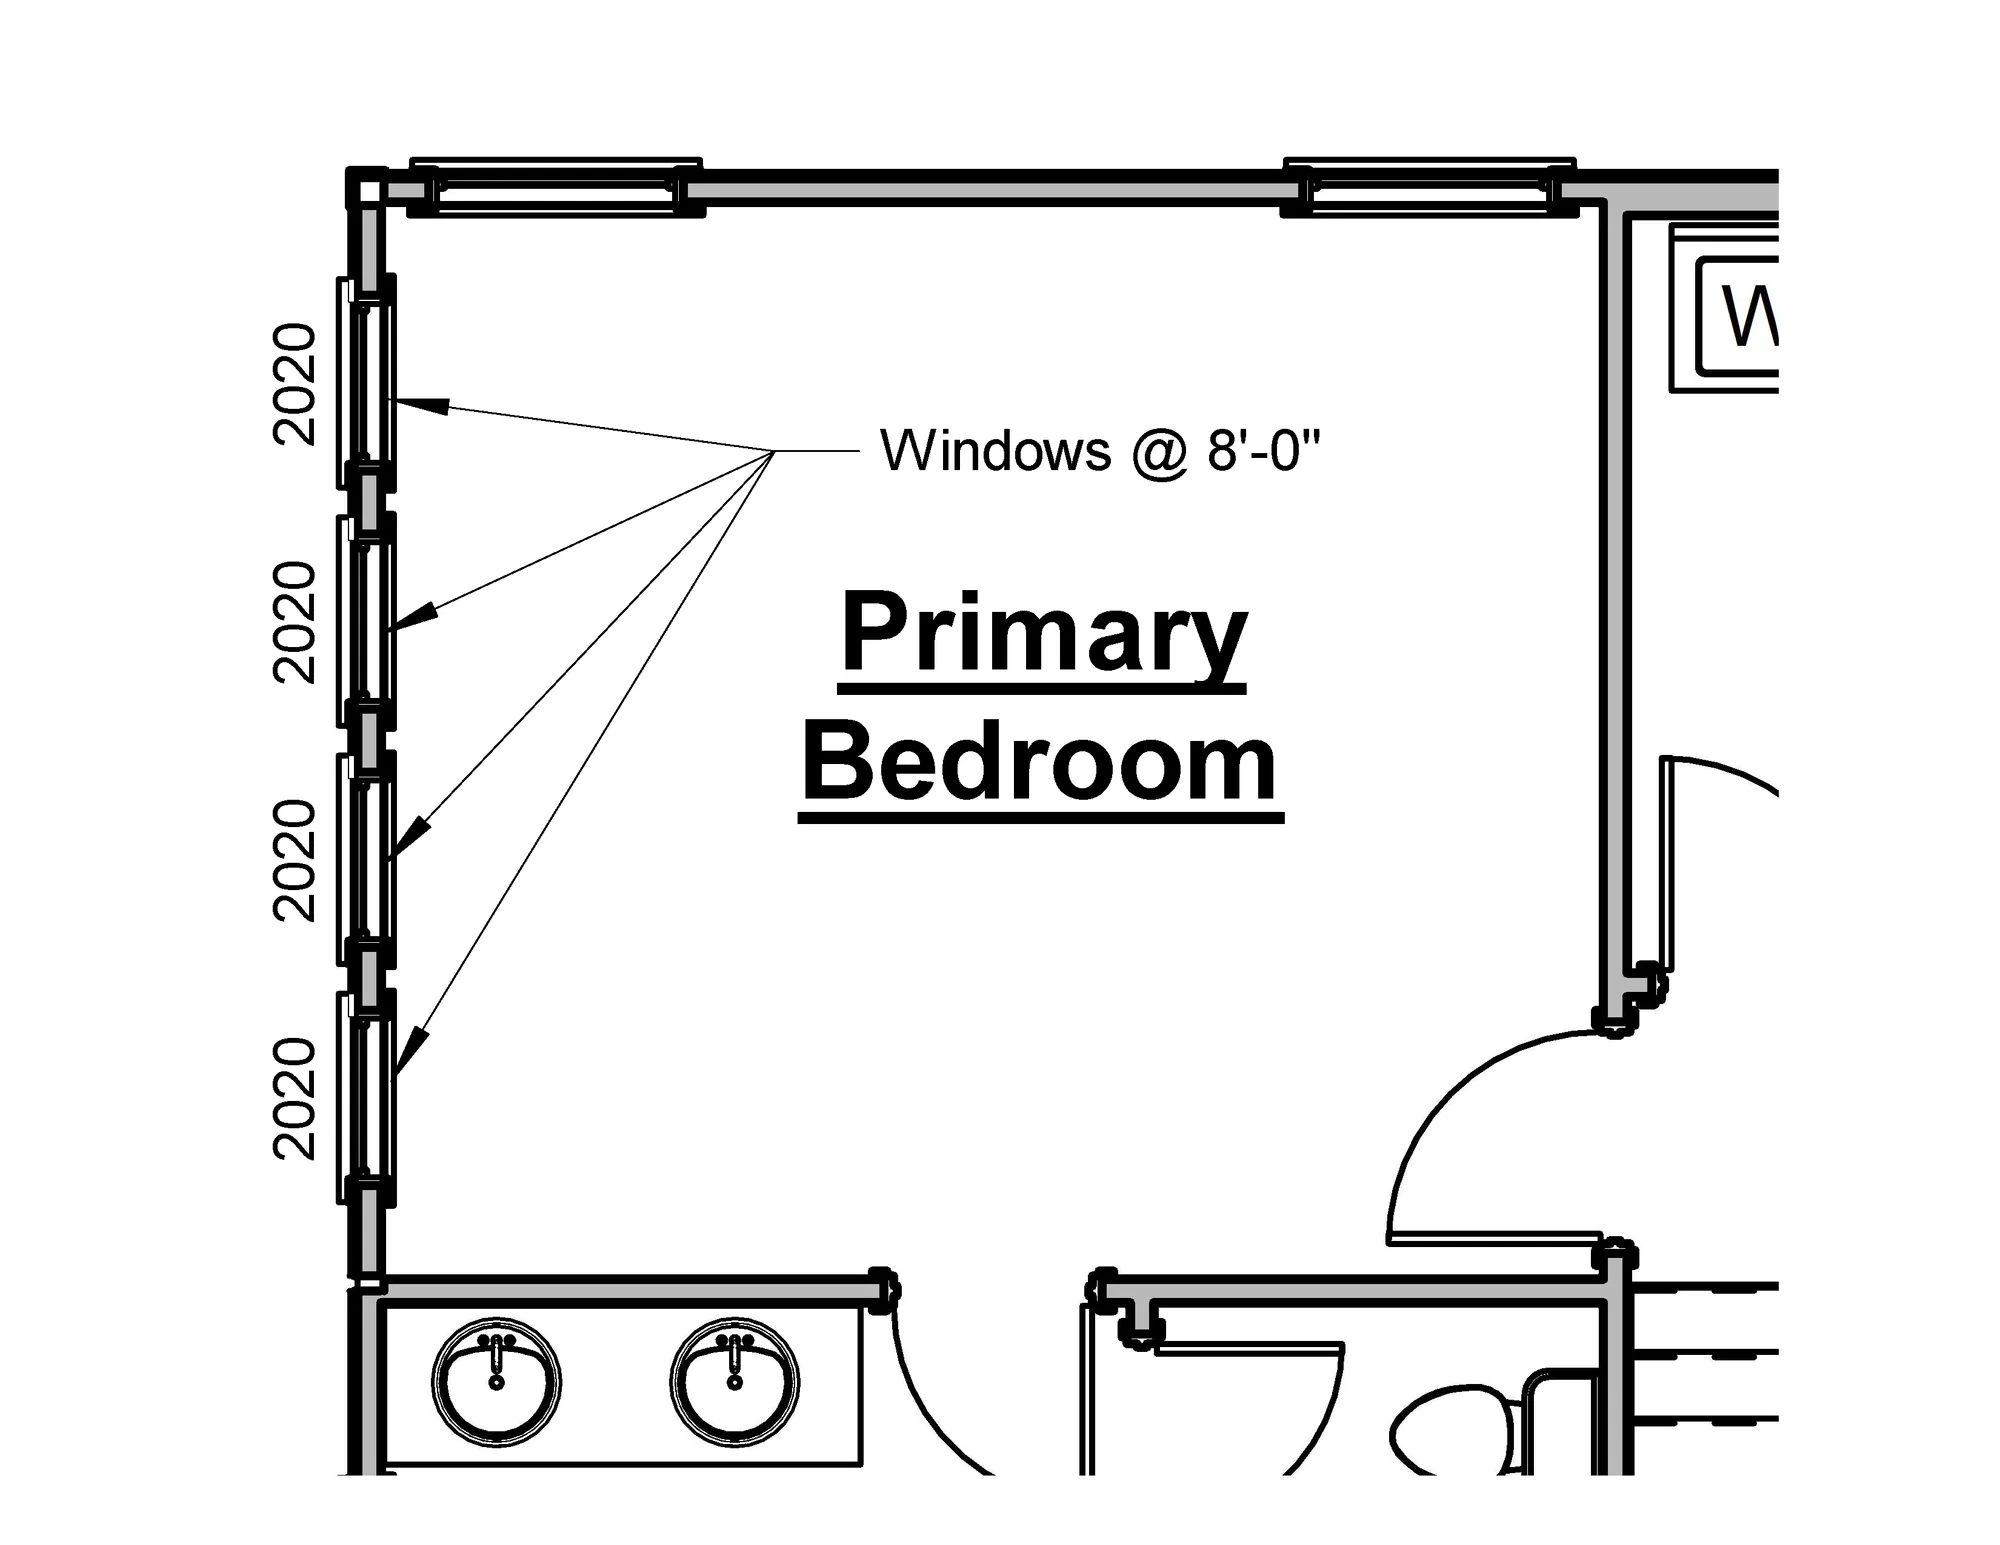 Primary Bedroom - Privacy Windows Option - undefined